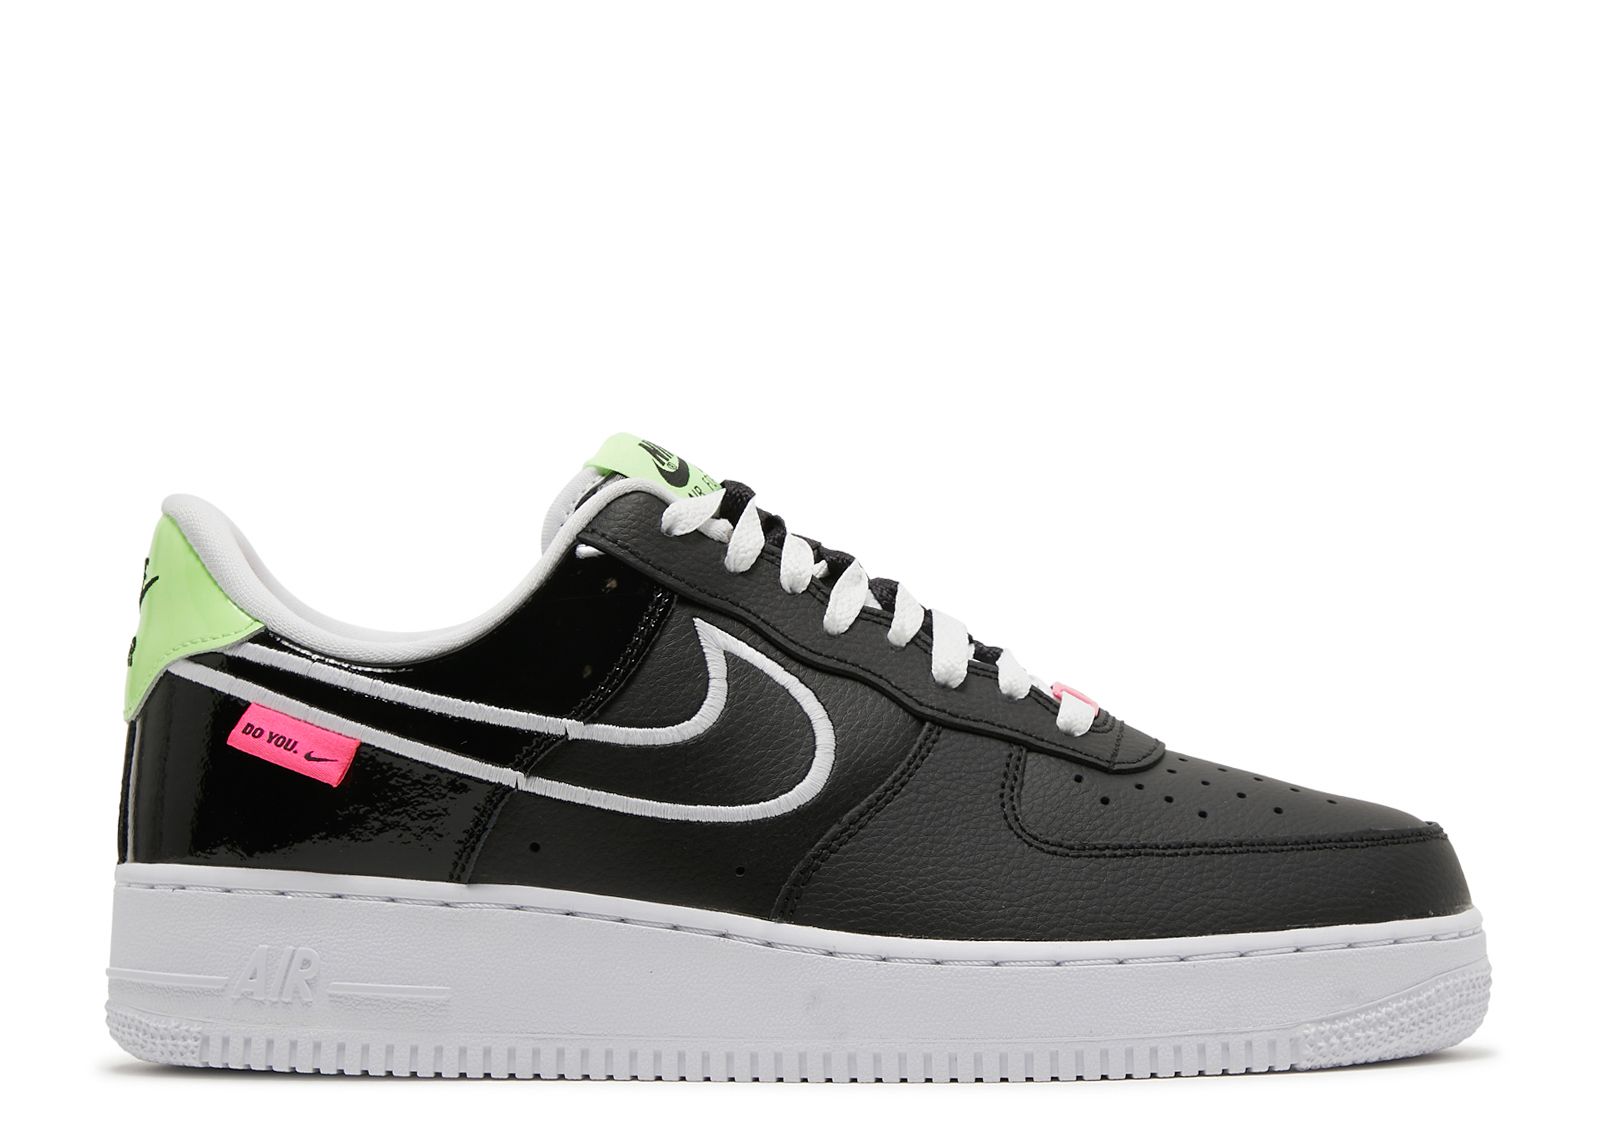 Кроссовки Nike Air Force 1 Low 'Do You', черный original authentic nike air force 1 low mini swoosh men s skateboarding shoes sport outdoor sneakers 2018 new arrival 823511 603